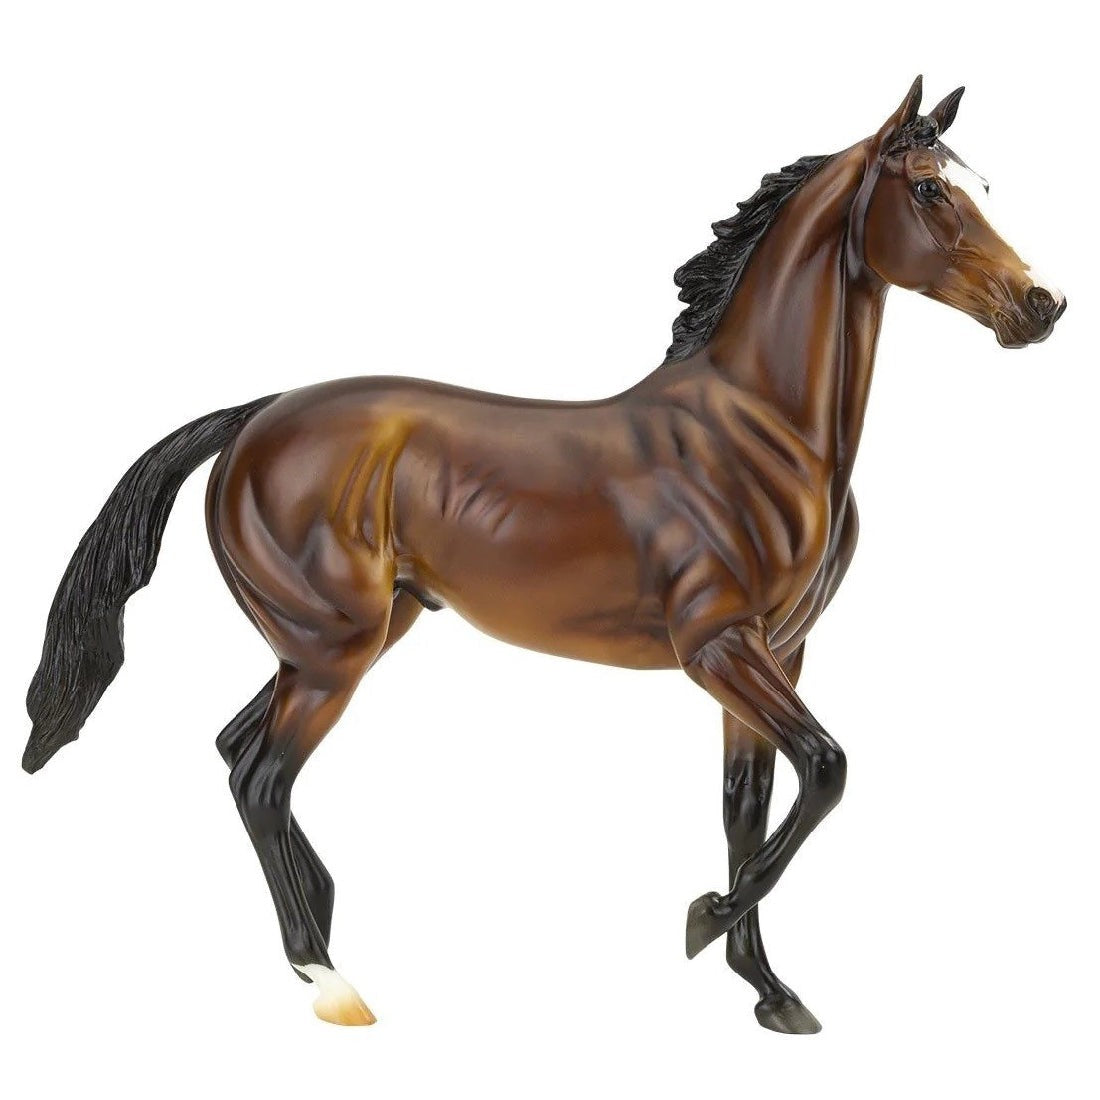 Breyer Horse Toys model of a brown horse with black mane.